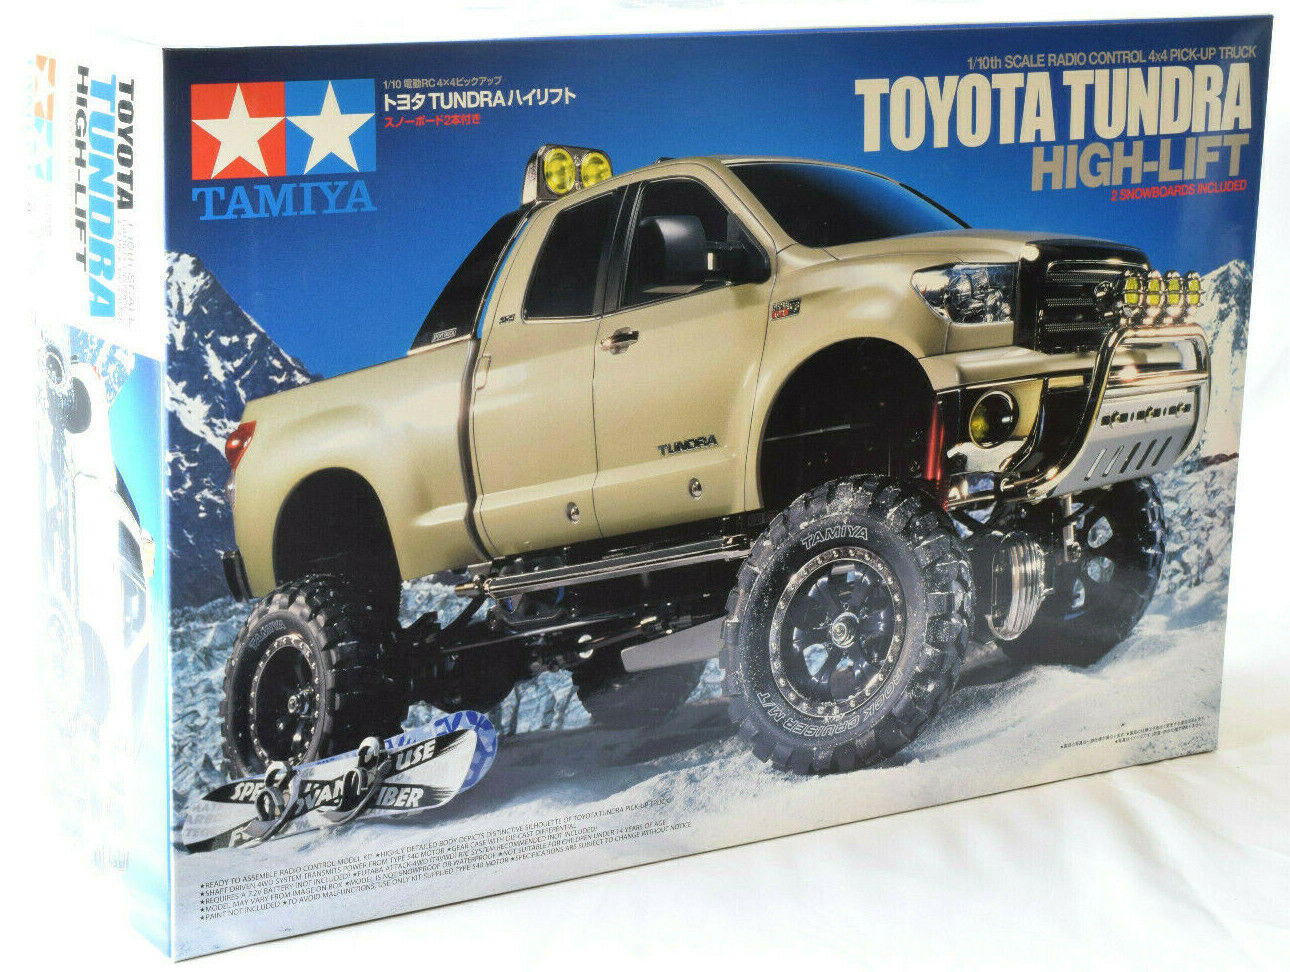 Tamiya Toyota Tundra High Lift Rc Truck With Lights For Sale